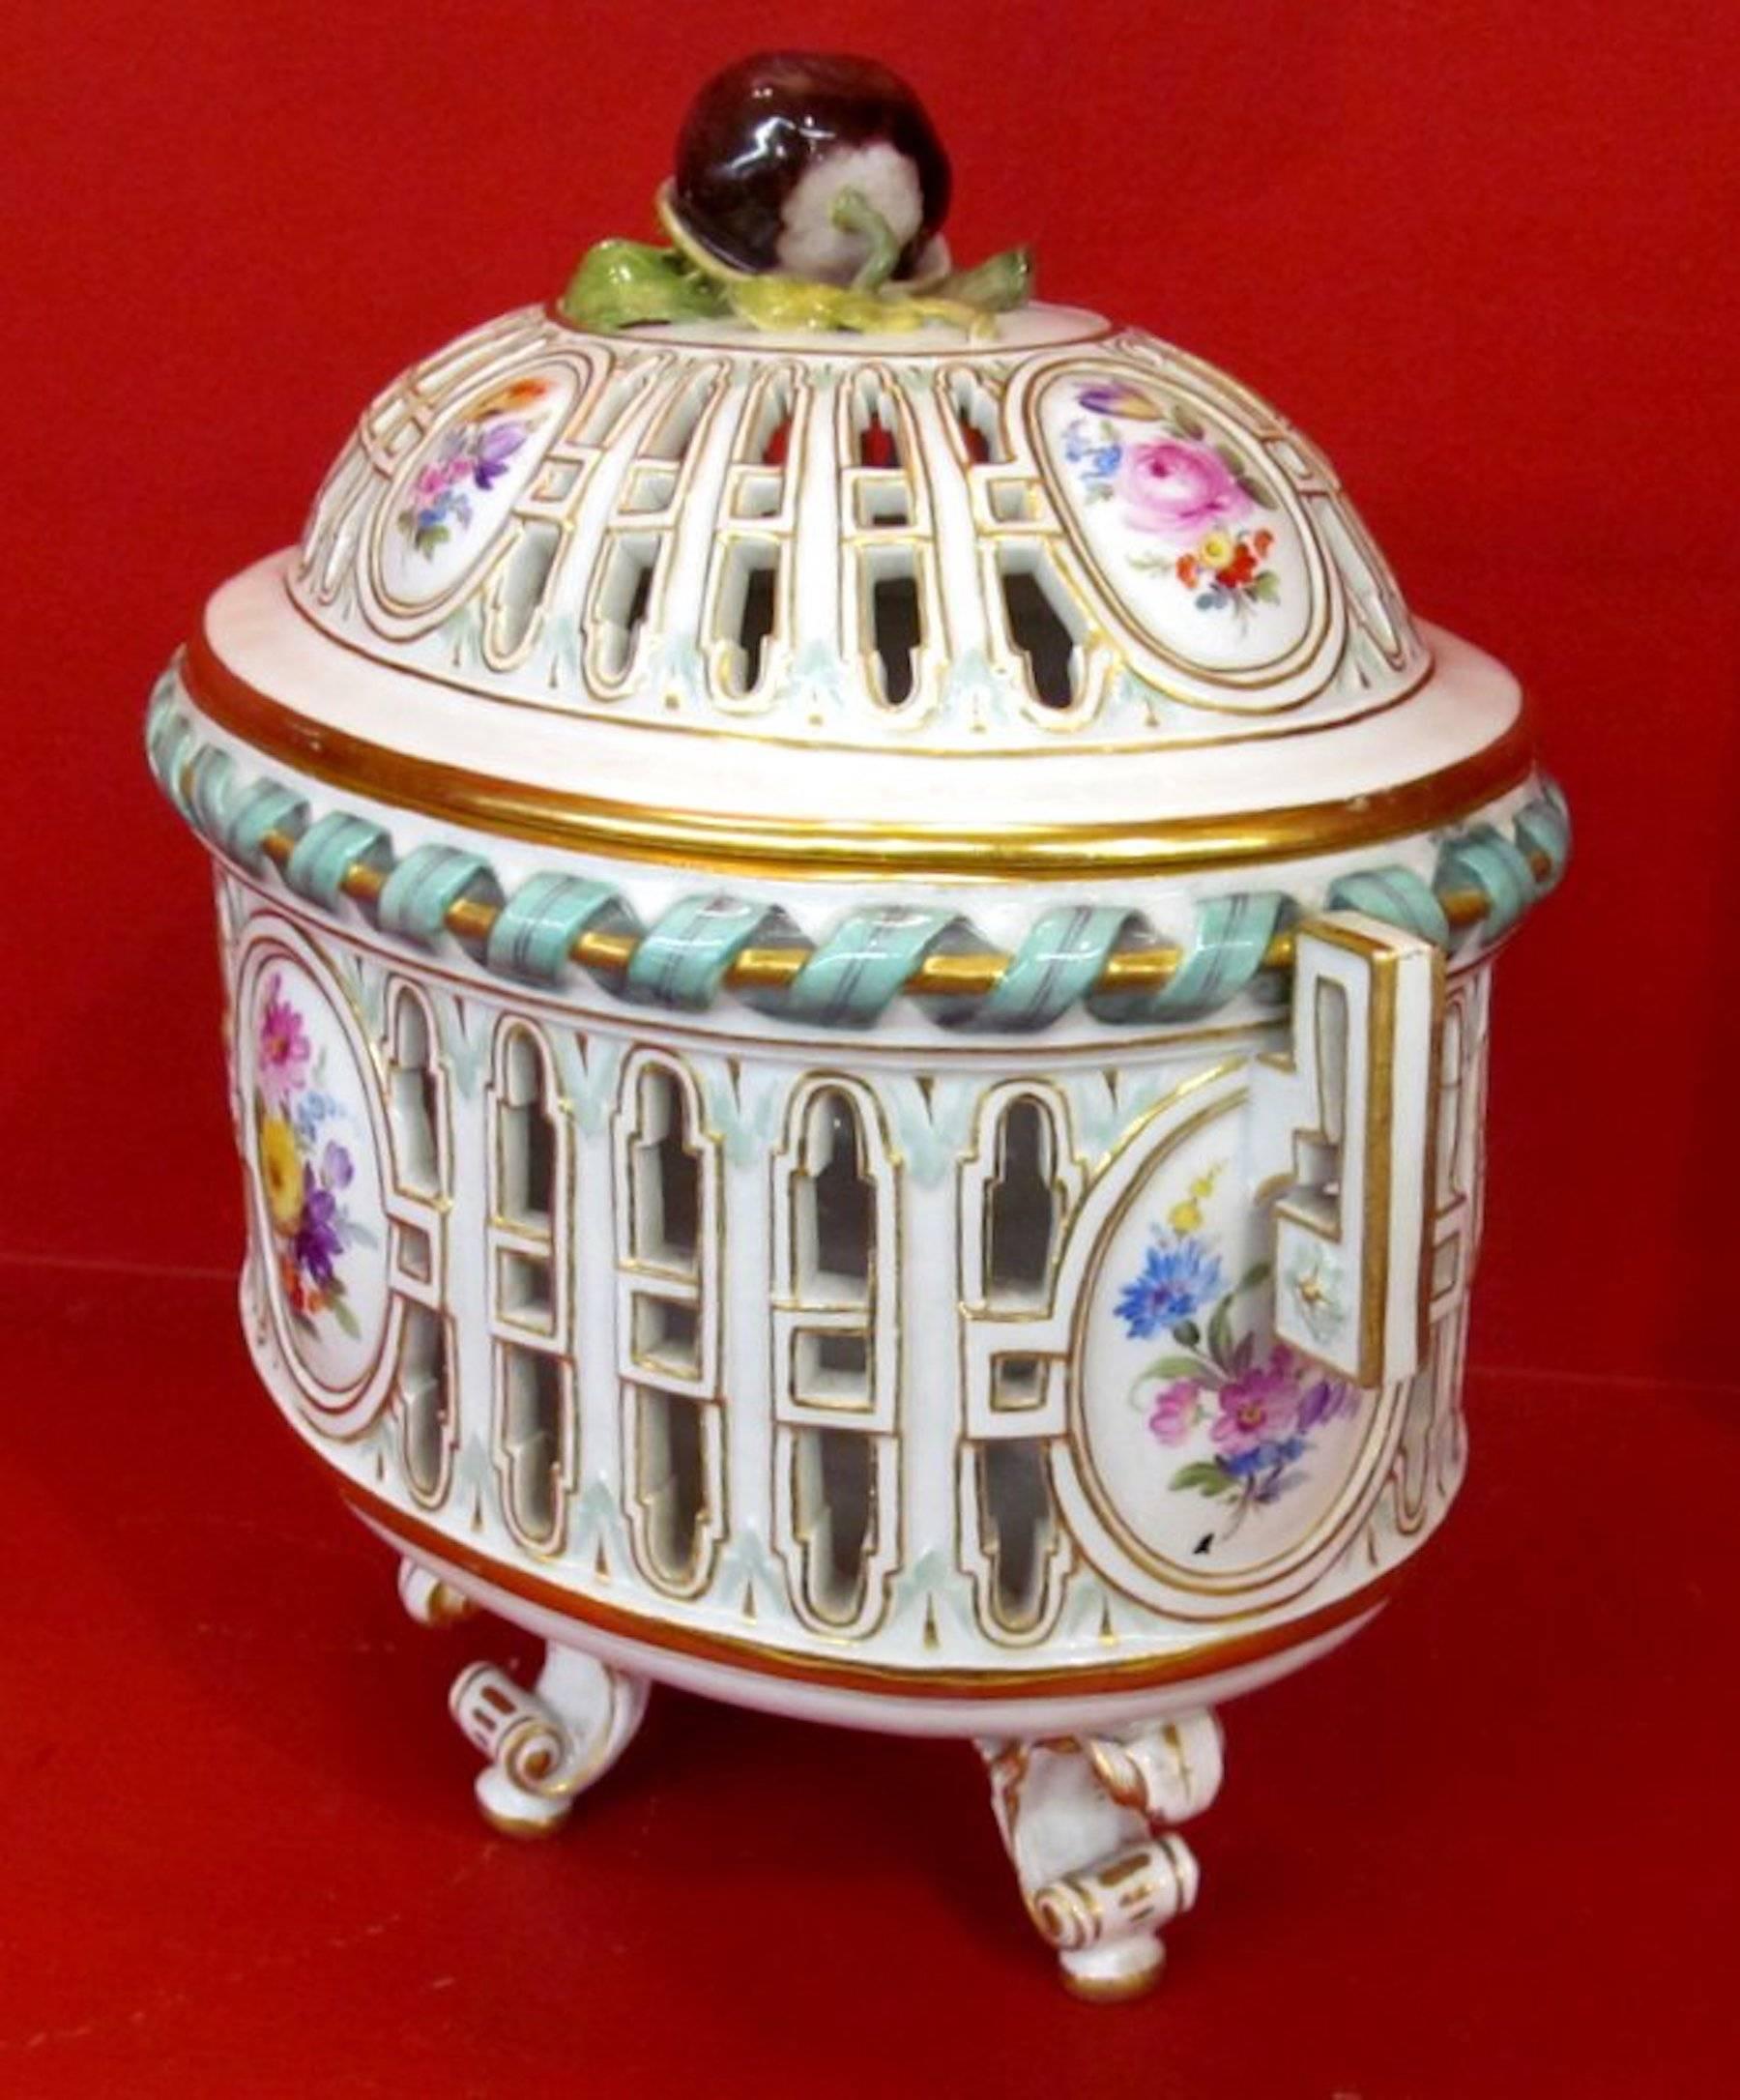 Exquisite quality rare and important antique Dresden or meissen hand-painted porcelain reticulated body chestnut basket or tureen with superbly formed chestnut shaped finial please note the exquisite hand-painted details throughout, including the